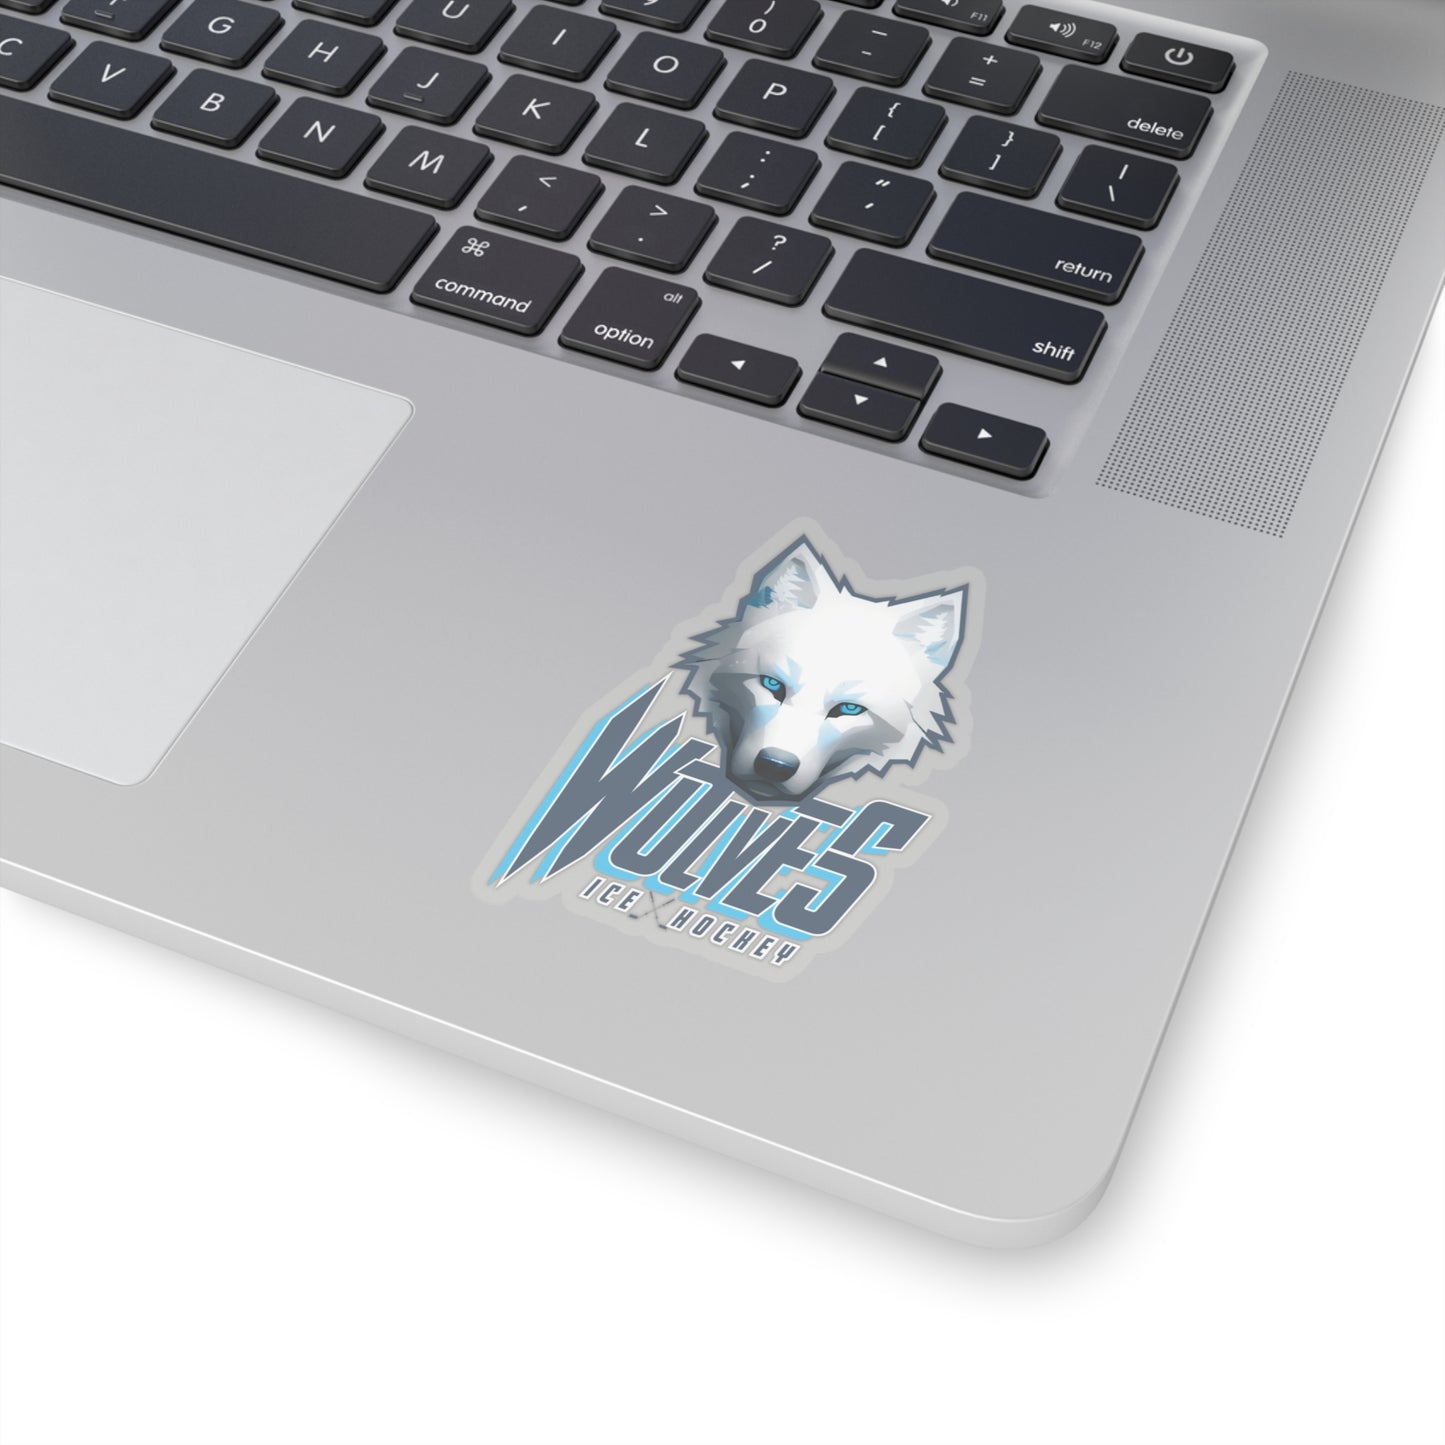 Wolves Car Decal - Outdoor